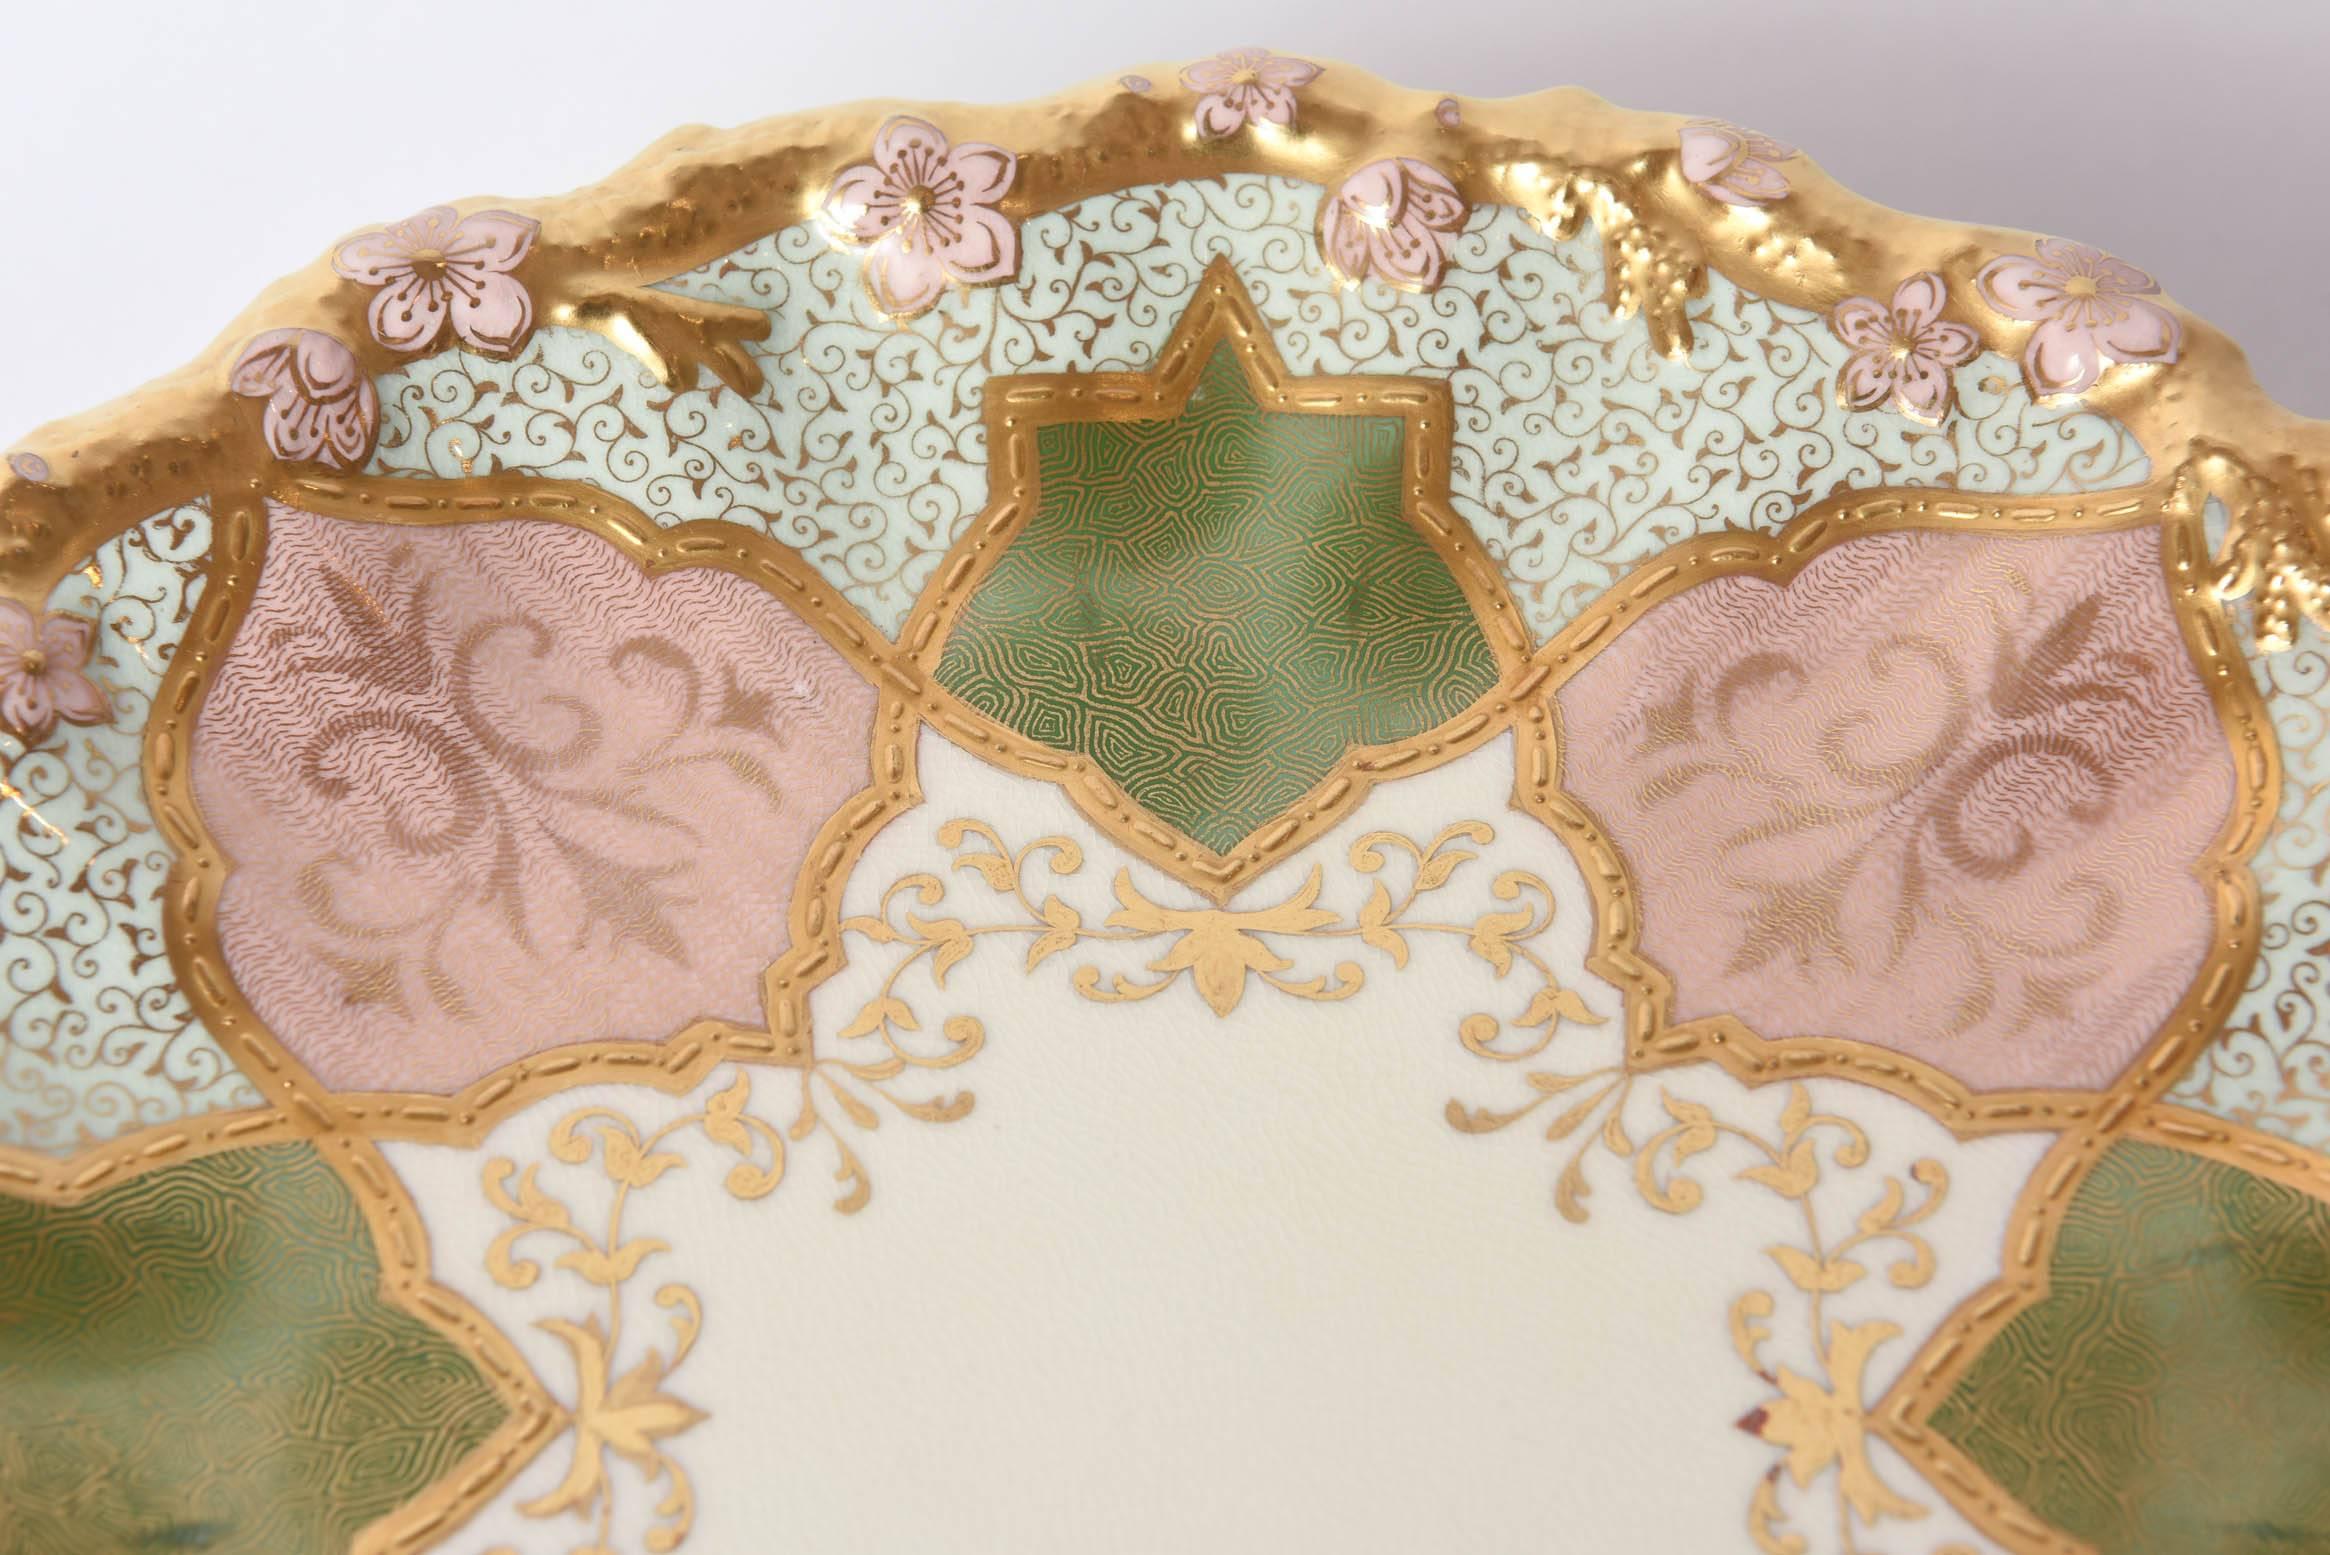 12 Exquisite and Stunning Plates, Pink and Green, Raised Gilt Encrusted, Scallop 1